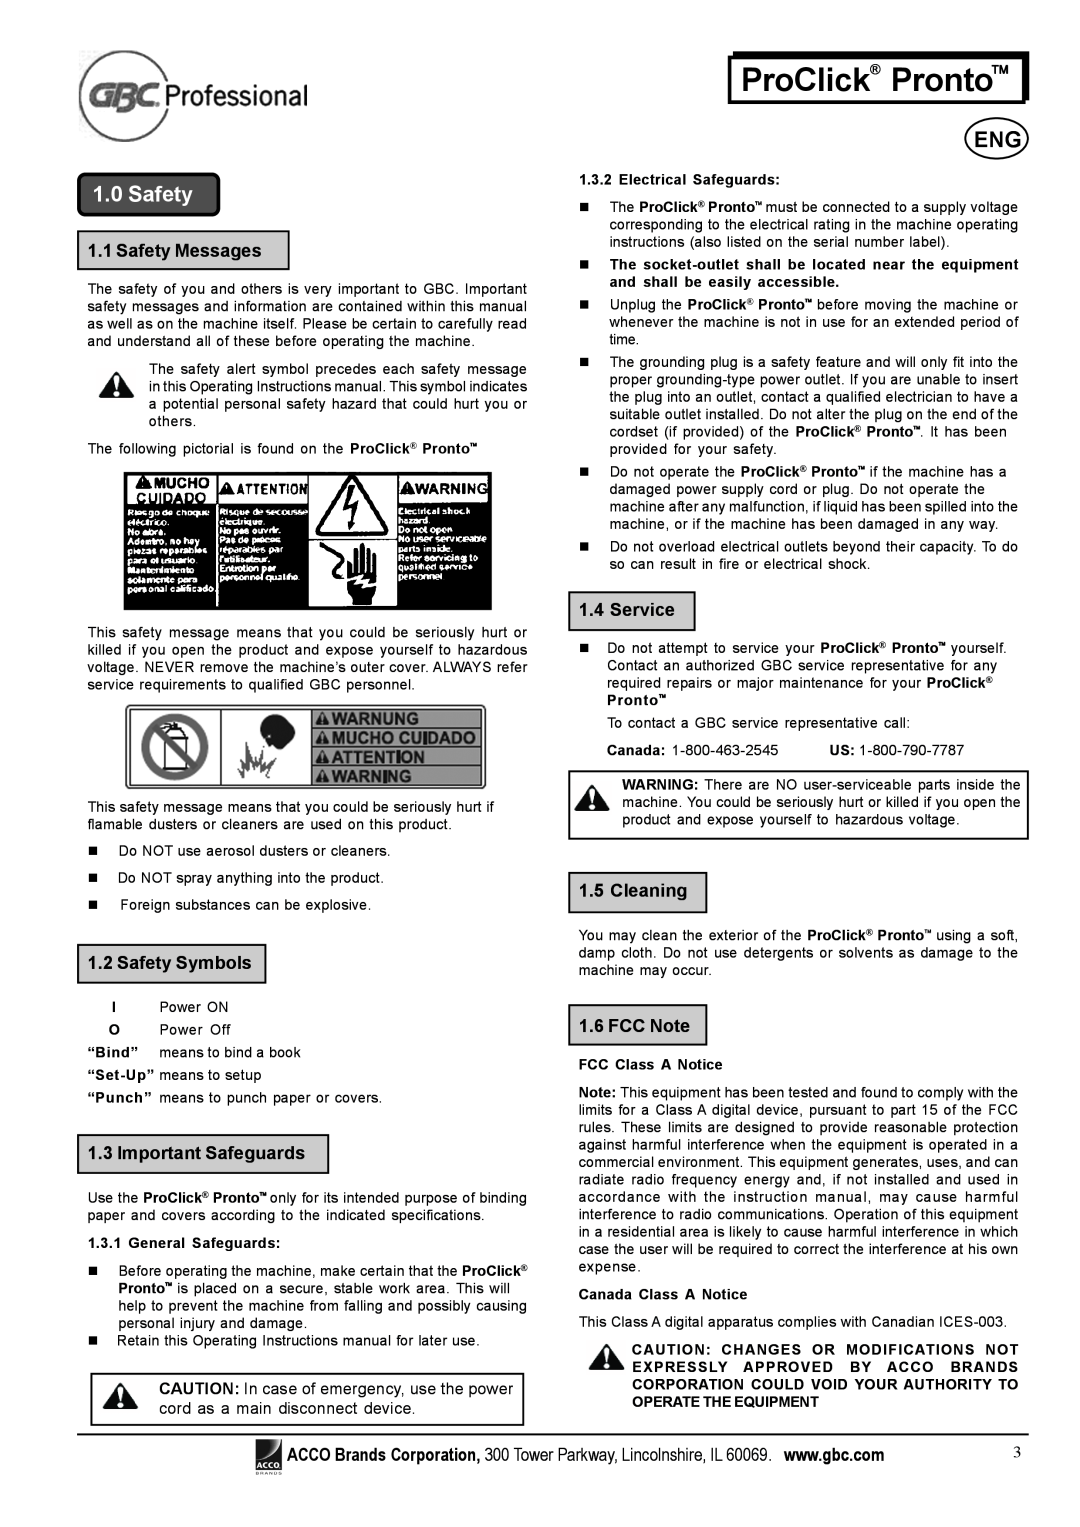 Tamron P2000 Safety Messages, Safety Symbols, Important Safeguards, Service, Cleaning, FCC Note, ProClick Pronto 